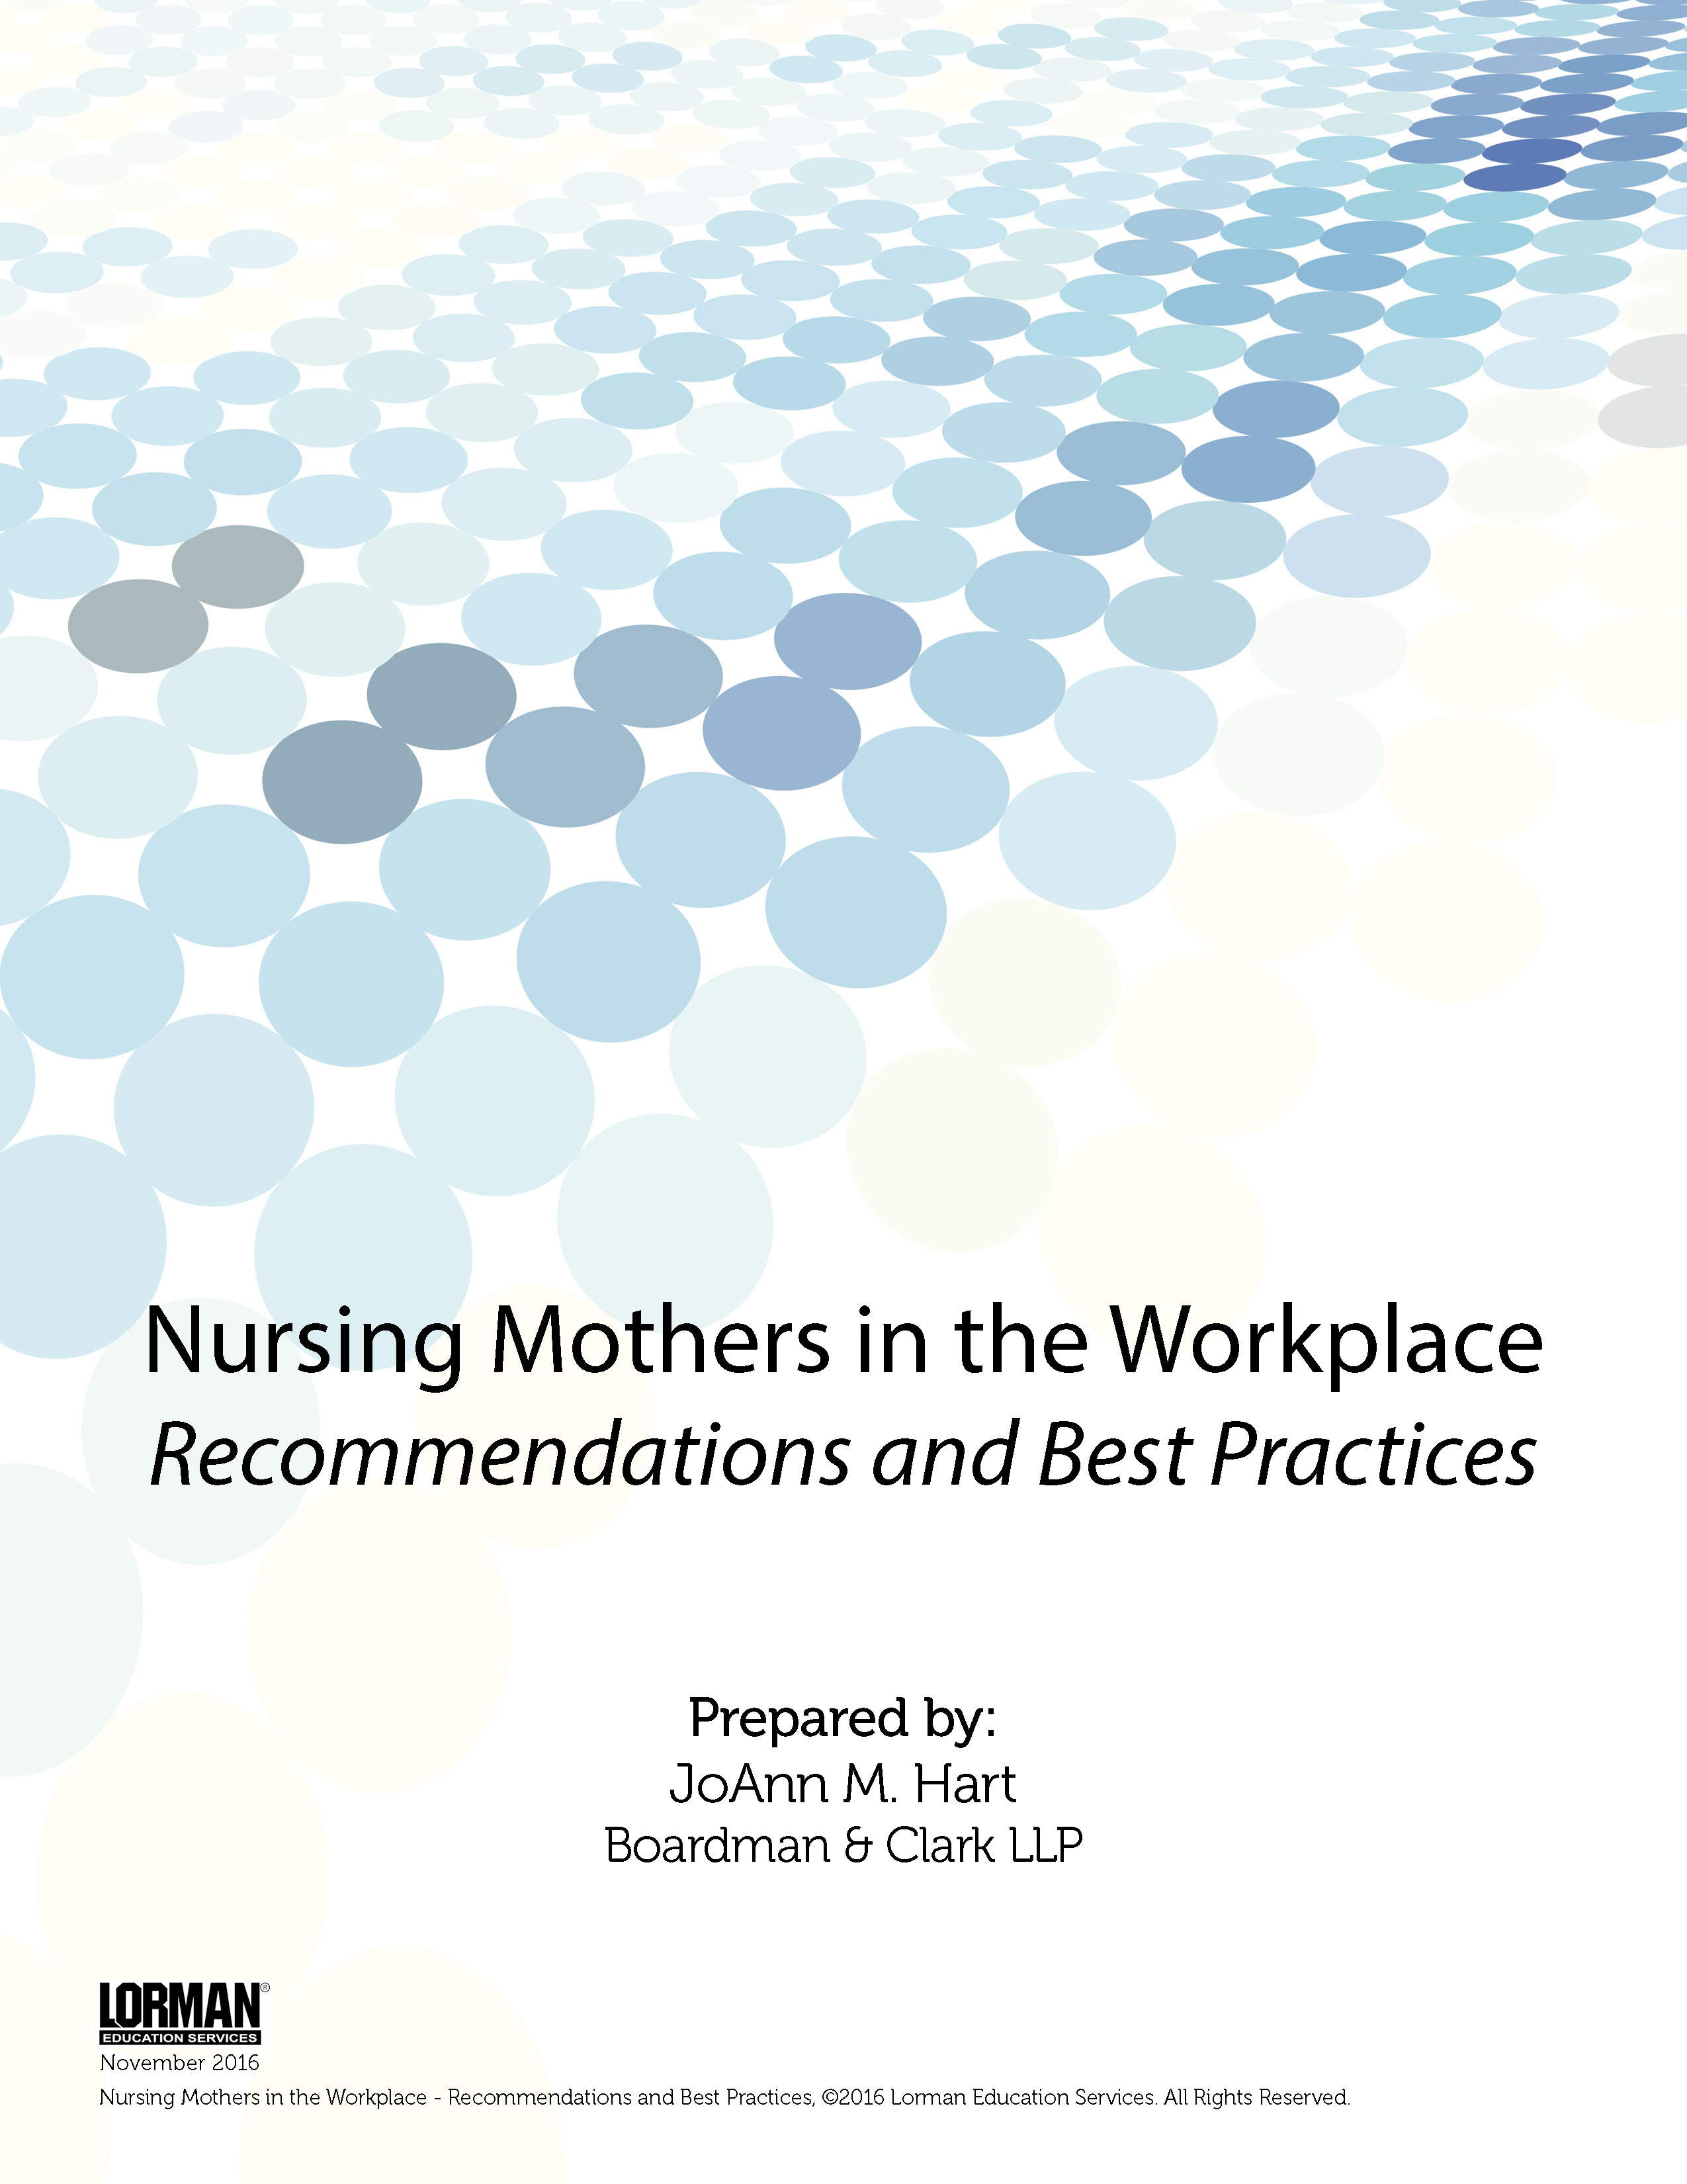 Nursing Mothers in the Workplace - Recommendations and Best Practices